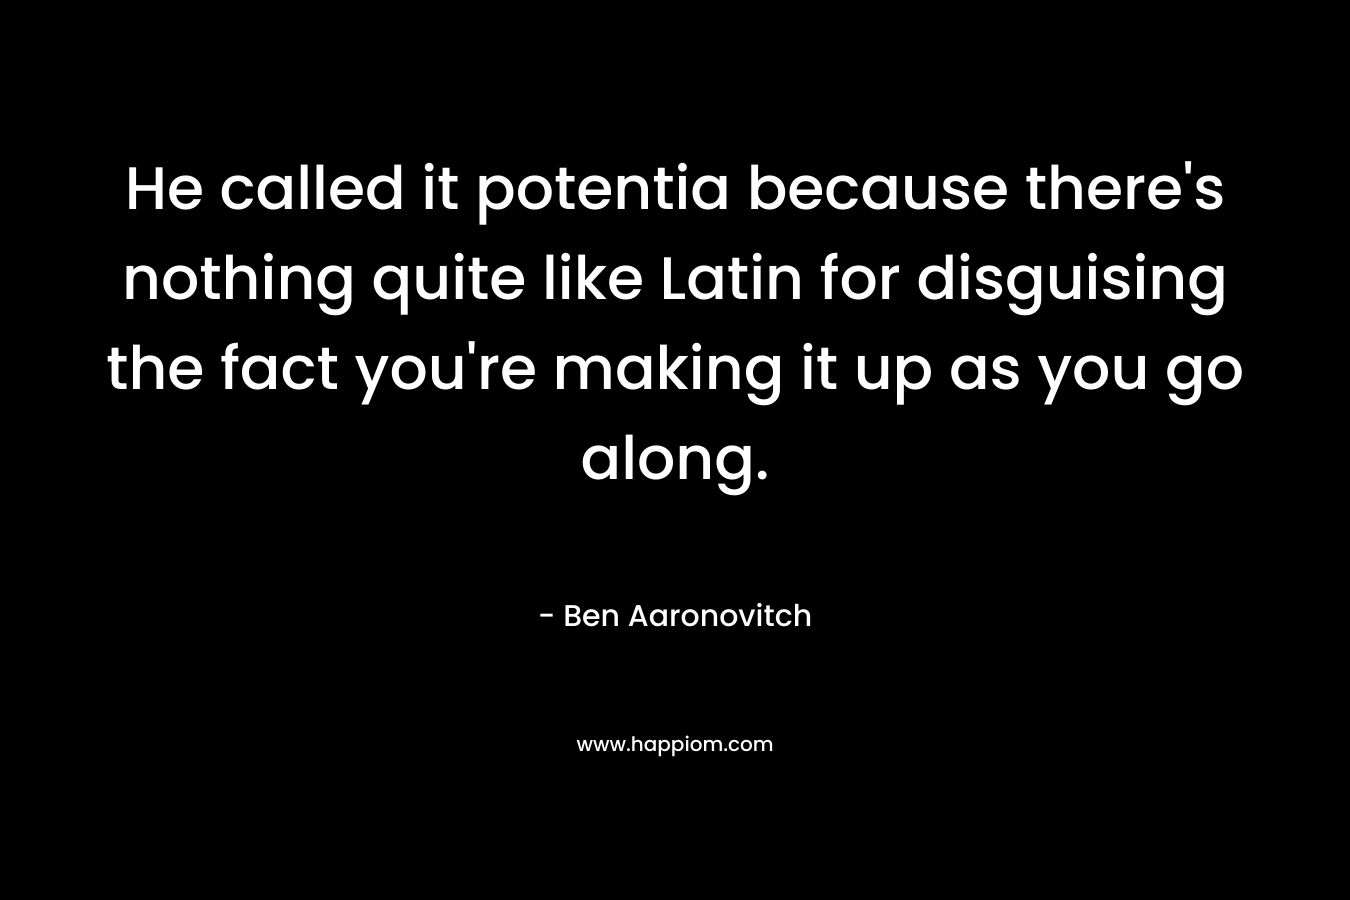 He called it potentia because there's nothing quite like Latin for disguising the fact you're making it up as you go along.